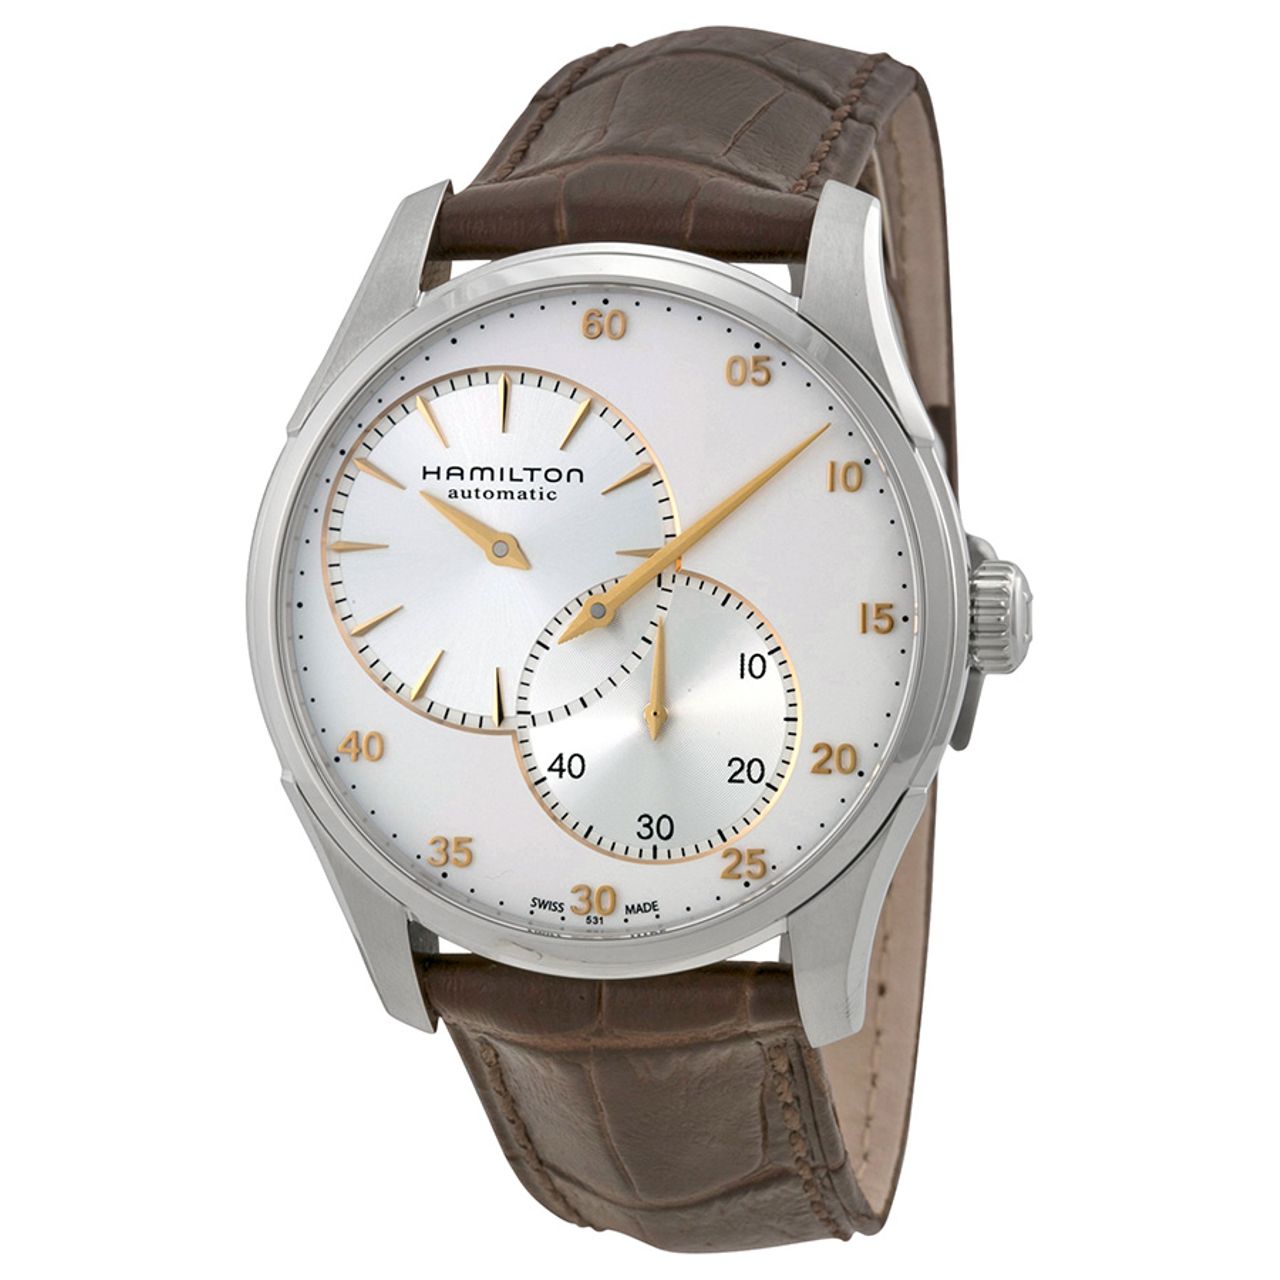 Hamilton H42615553 Mens Silver Dial Analog Automatic Watch with Leather Strap